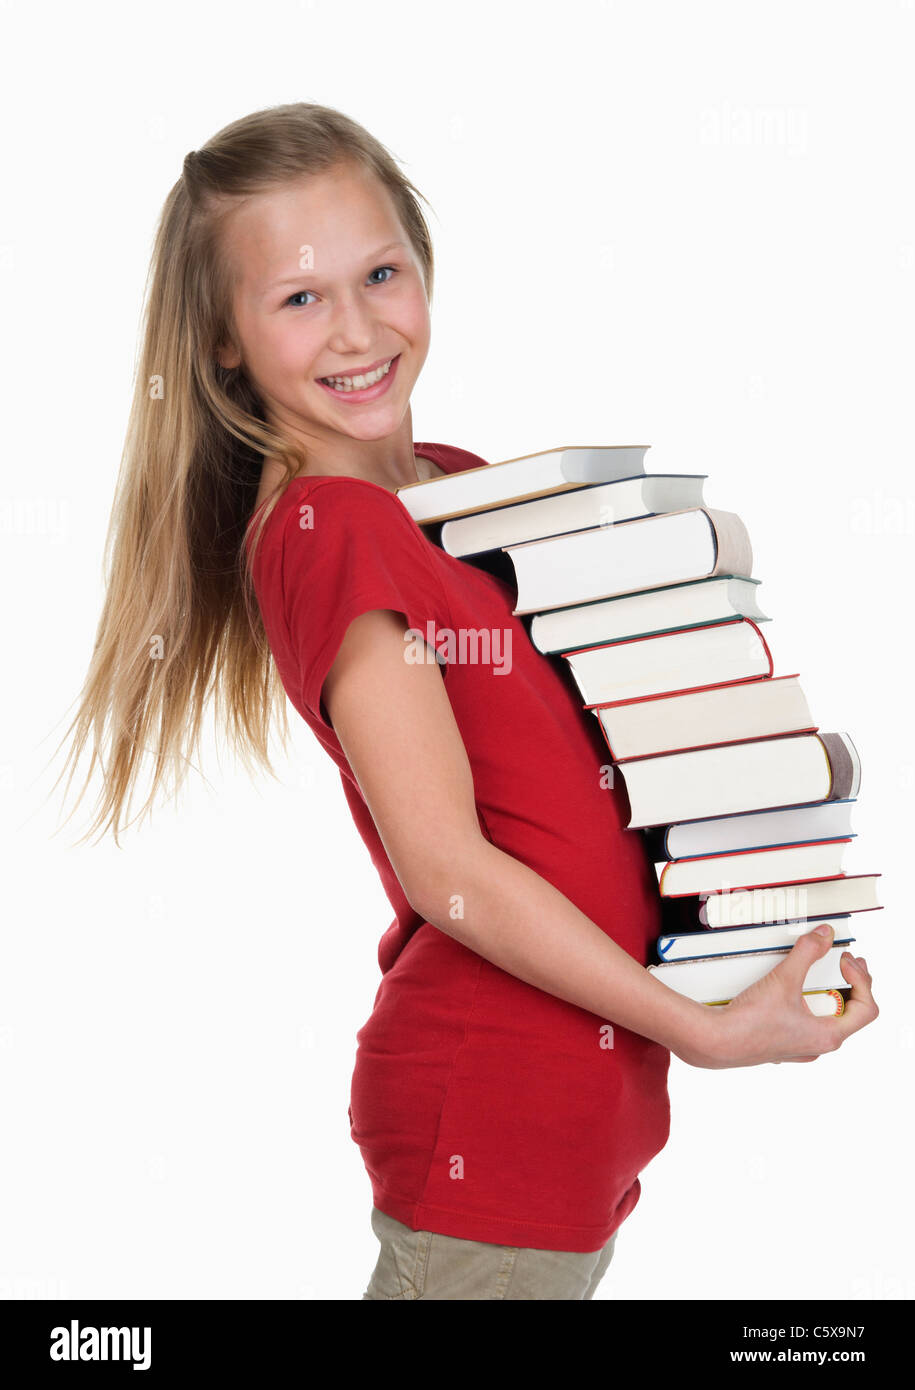 Girl carrying stack of books against white background Stock Photo